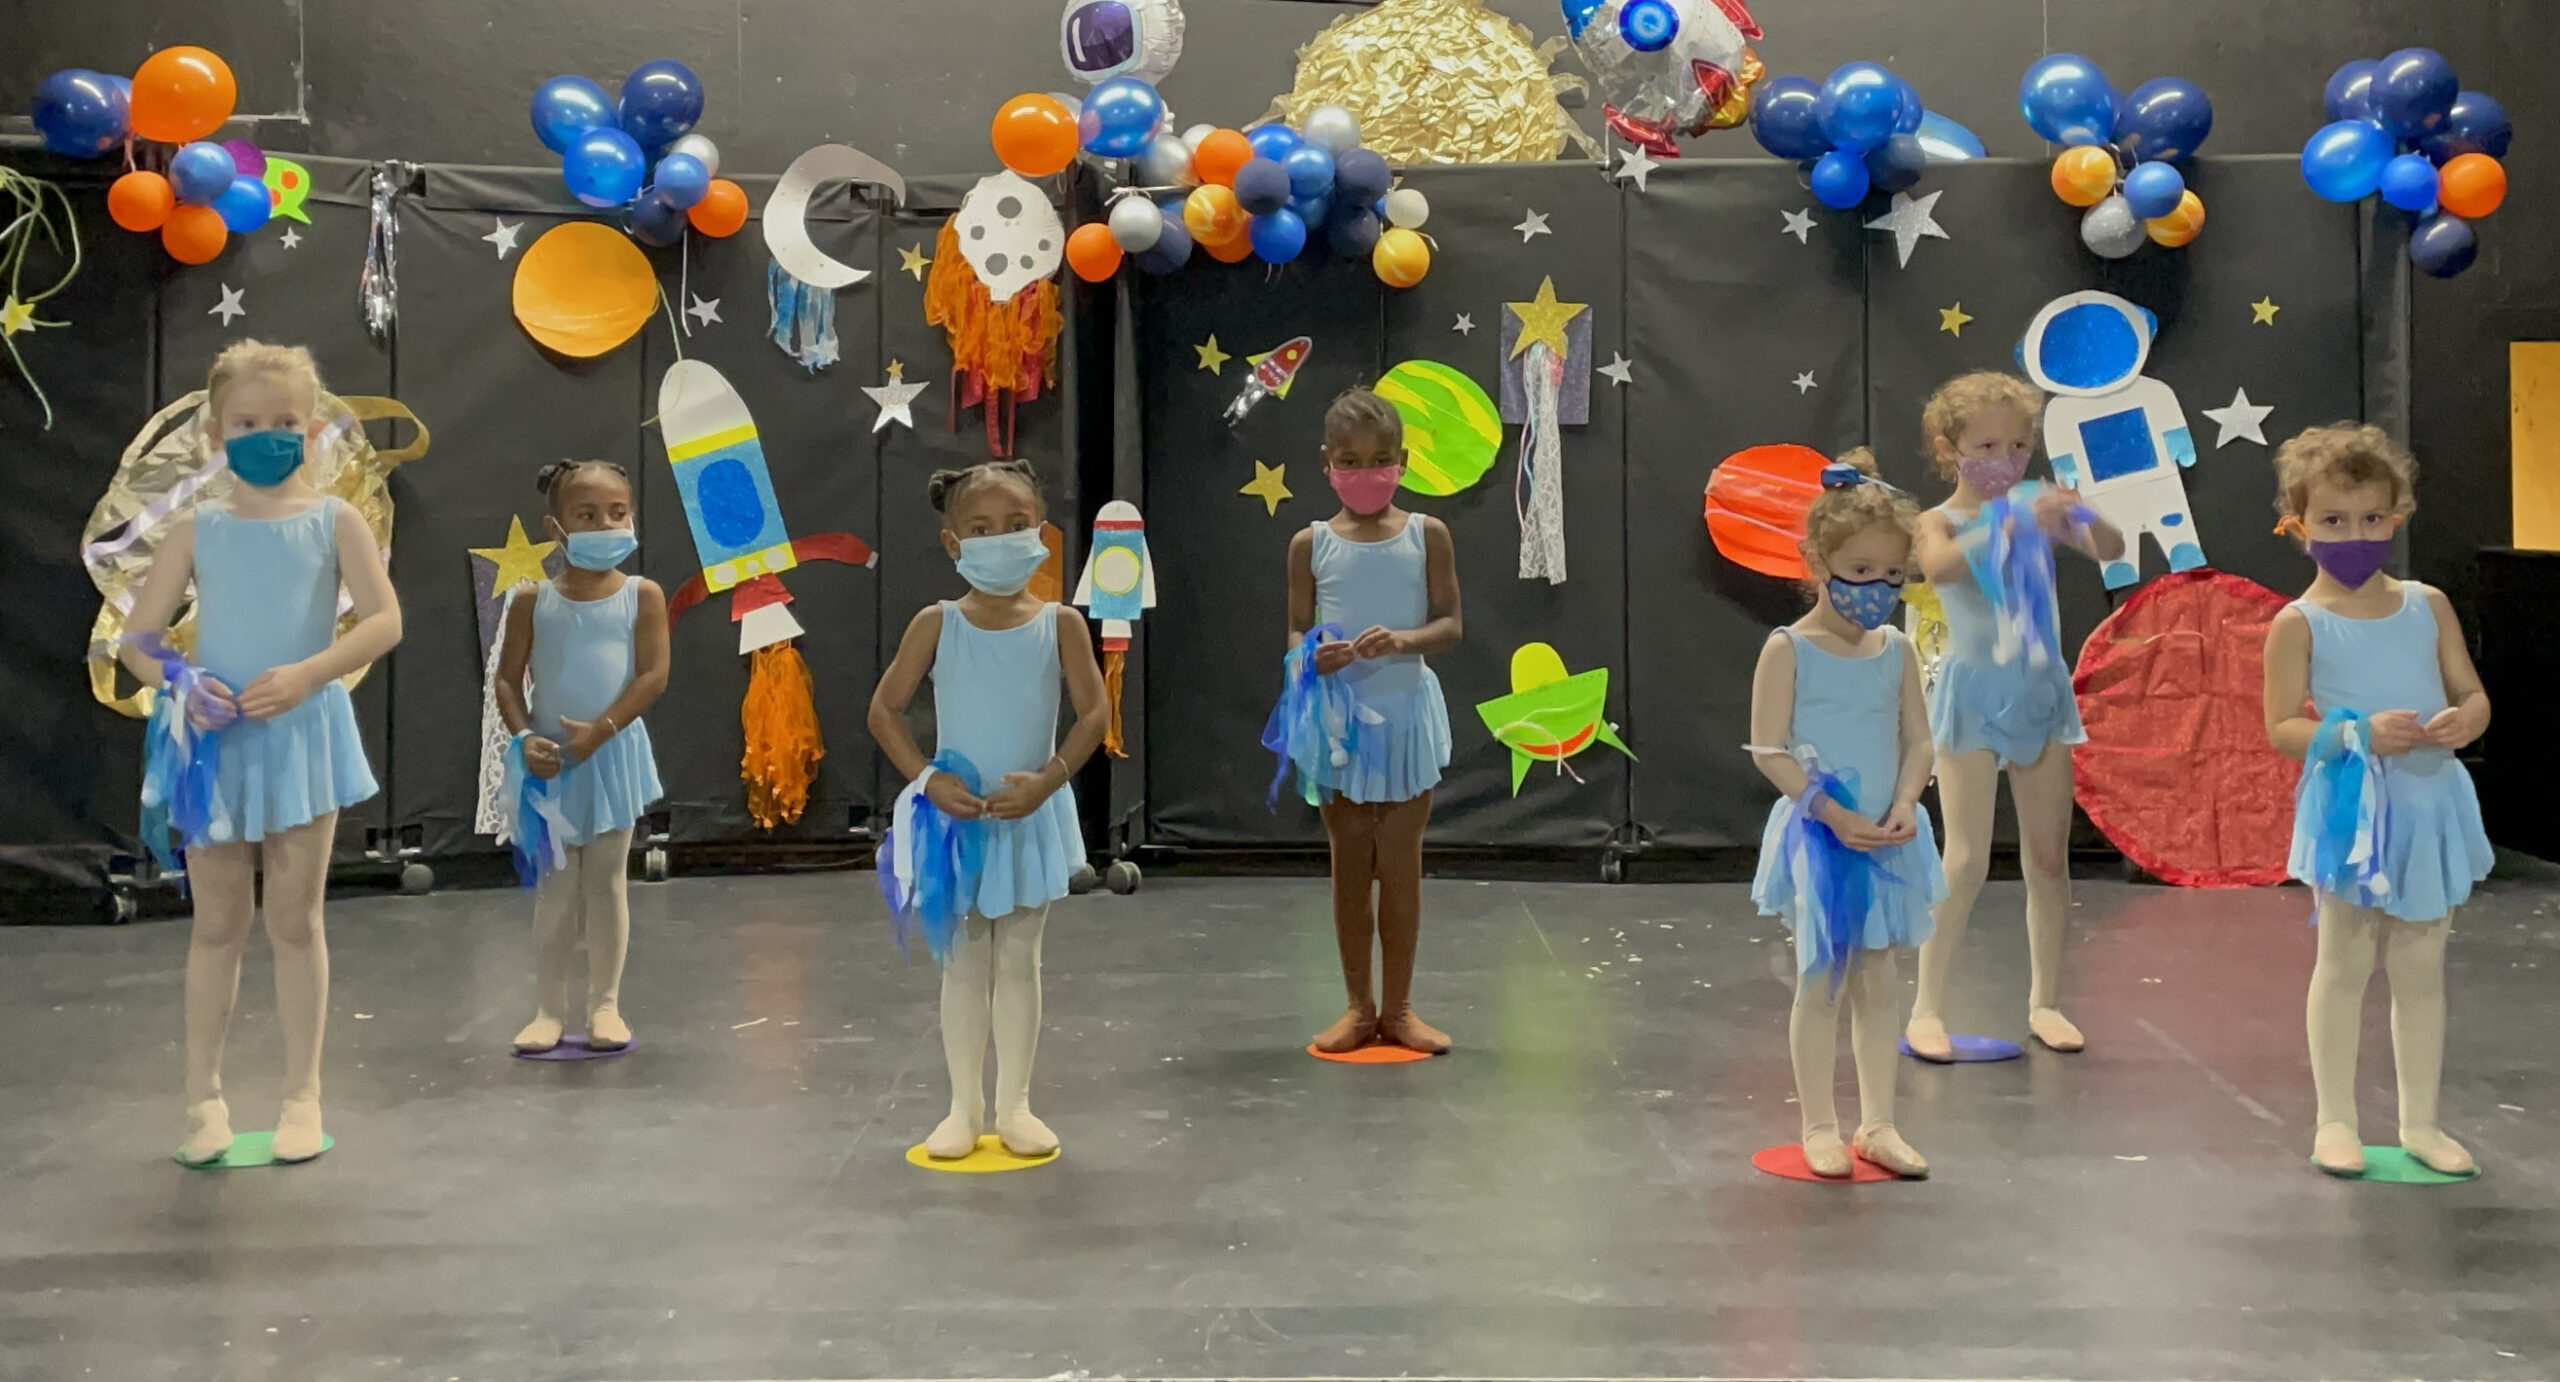 Studio decorated with an outer space theme and group of young dancers in blue leotards and skirts stand on colorful spots.